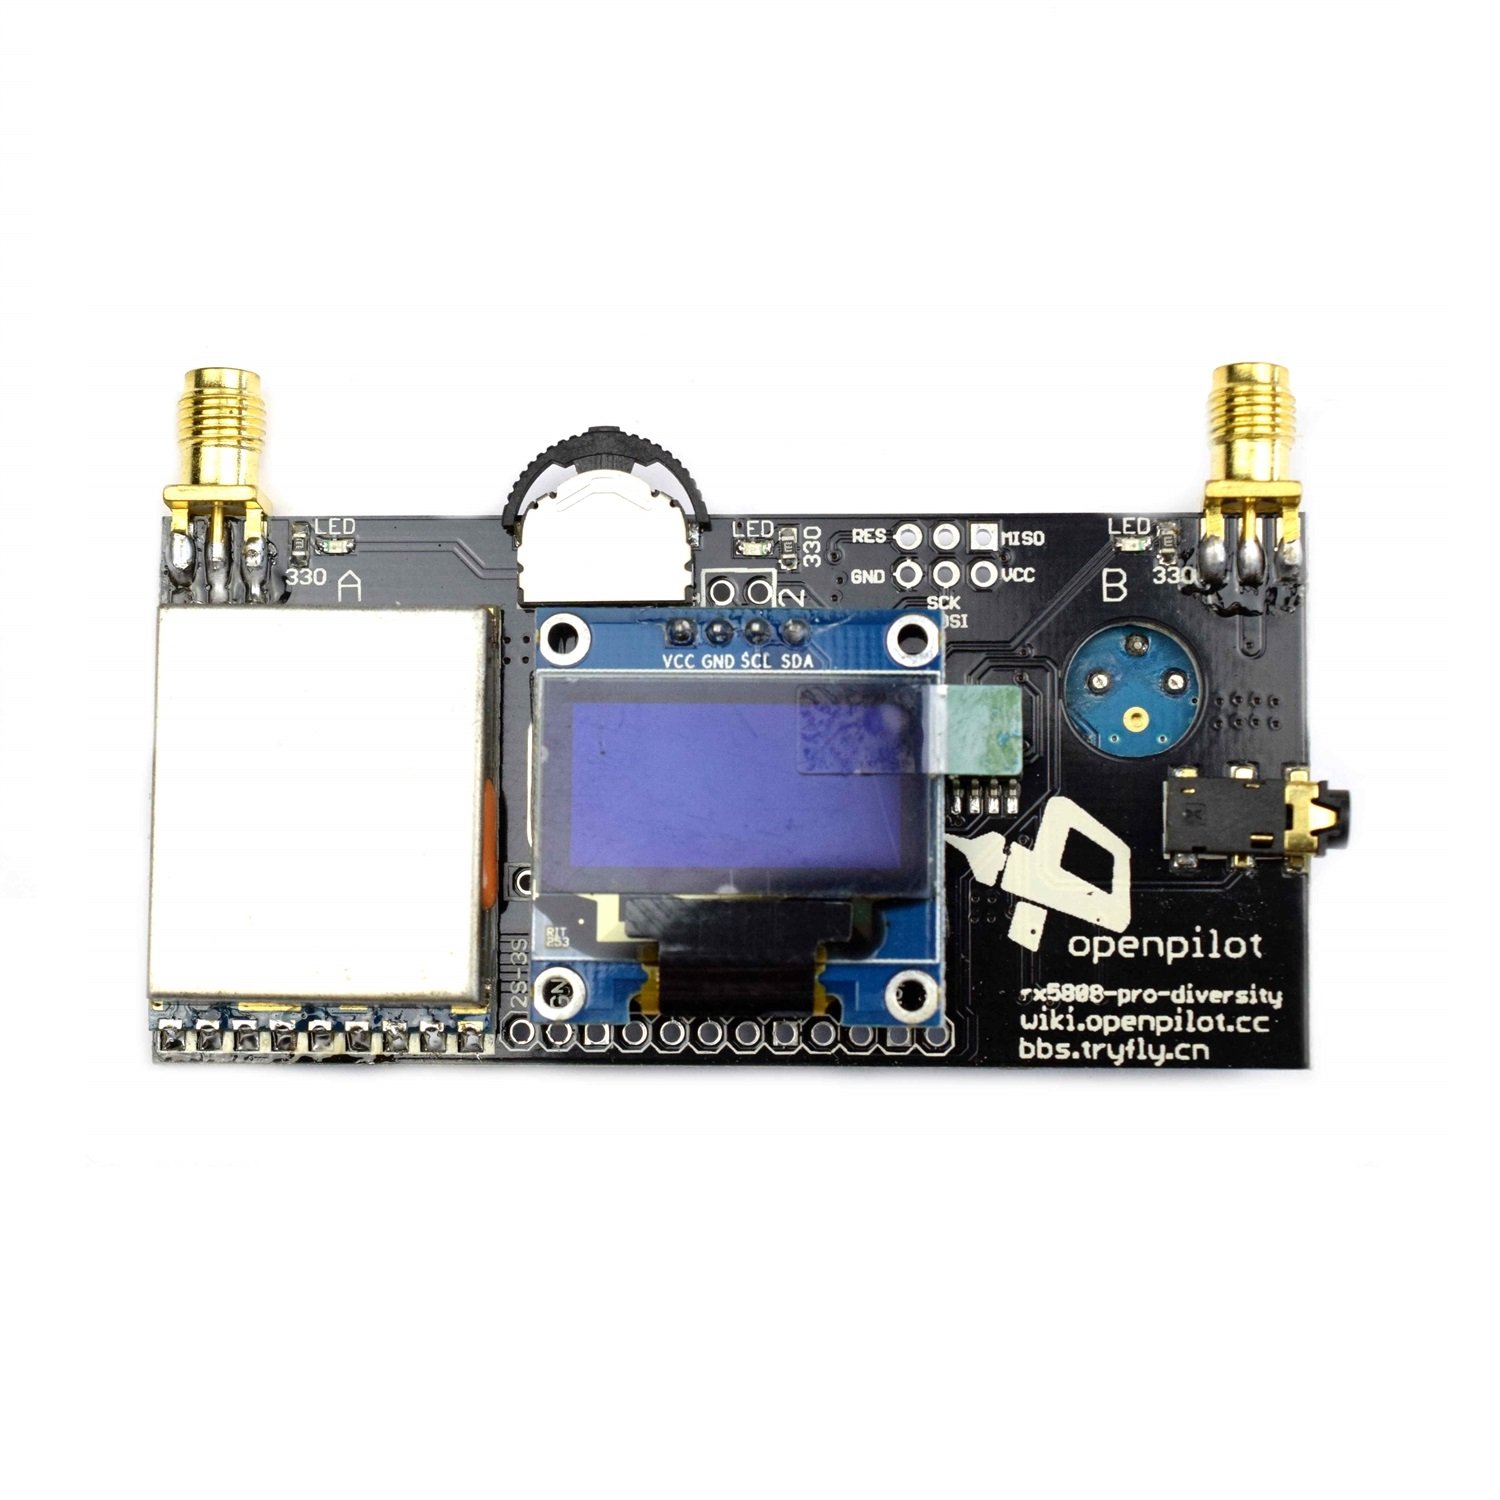 Diy Rx5808 5.8G 40Ch Diversity Fpv Receiver With Oled Display For Fpv Racer Quad